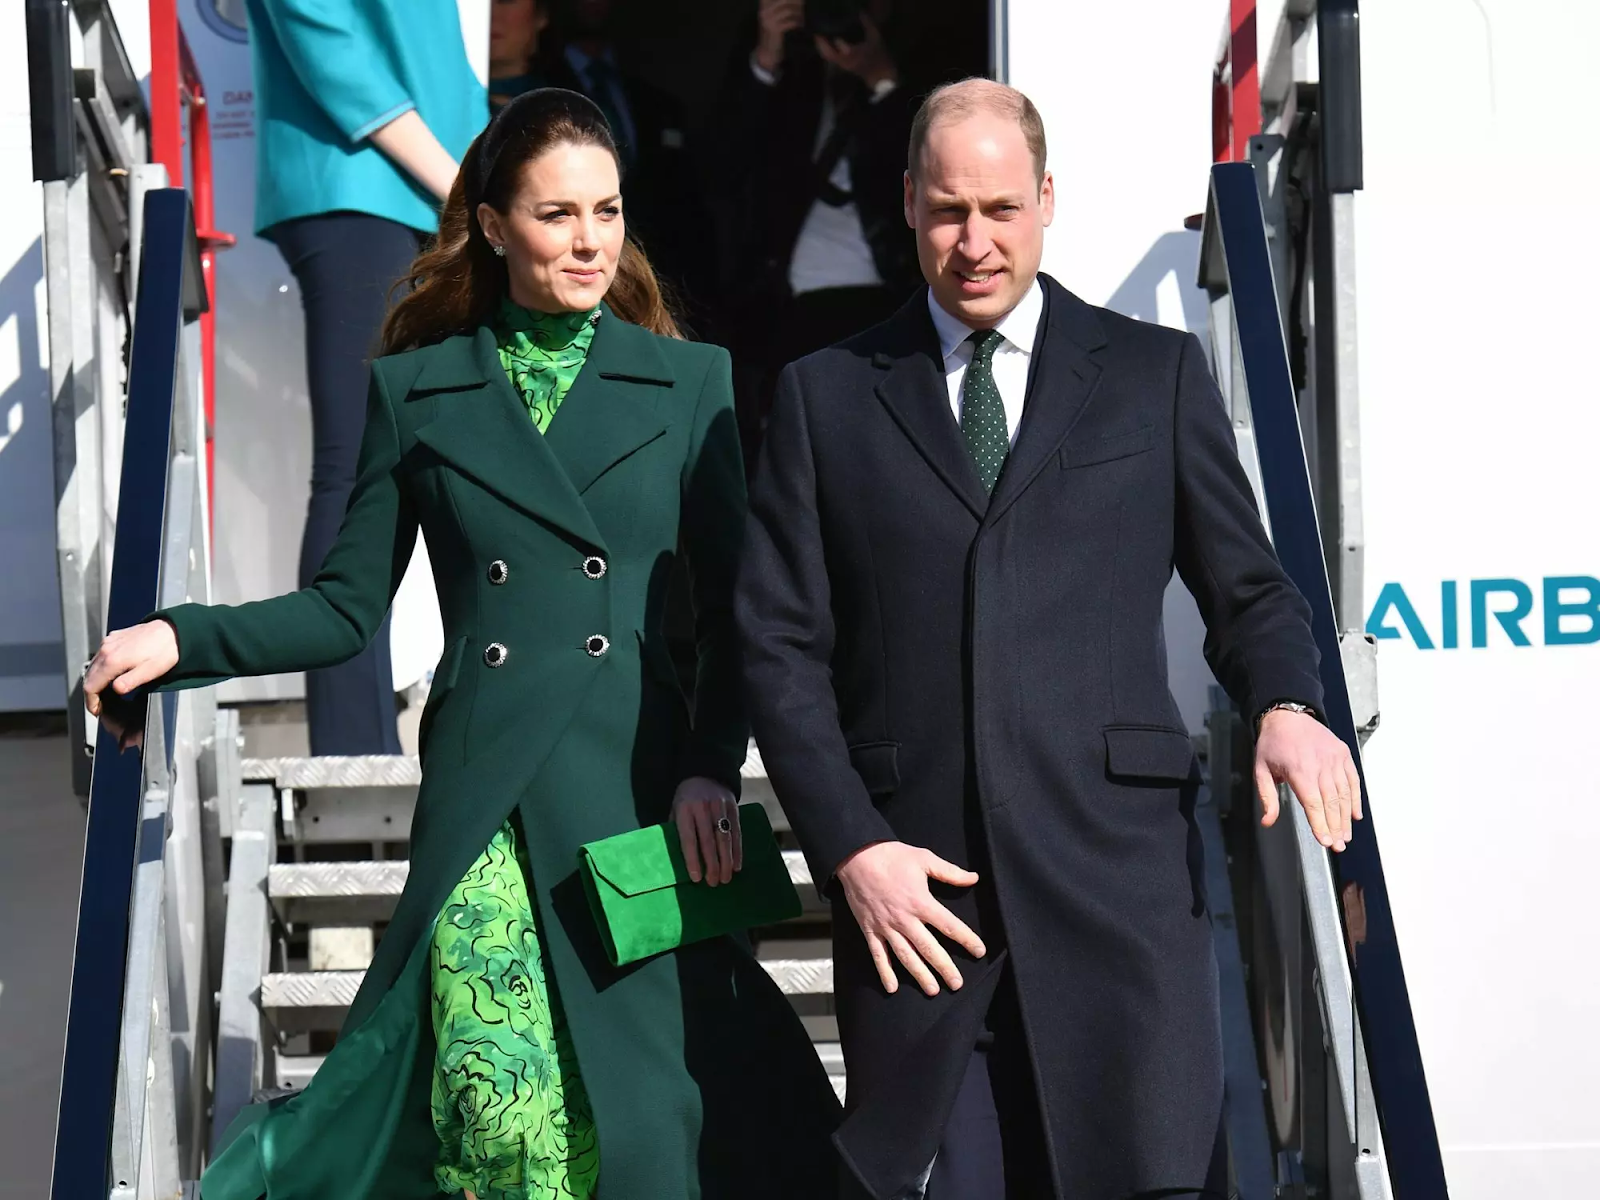 See This Detail About the Outfit That Kate Middleton Wore to a Royal Engagement, Which Sparked Rumors